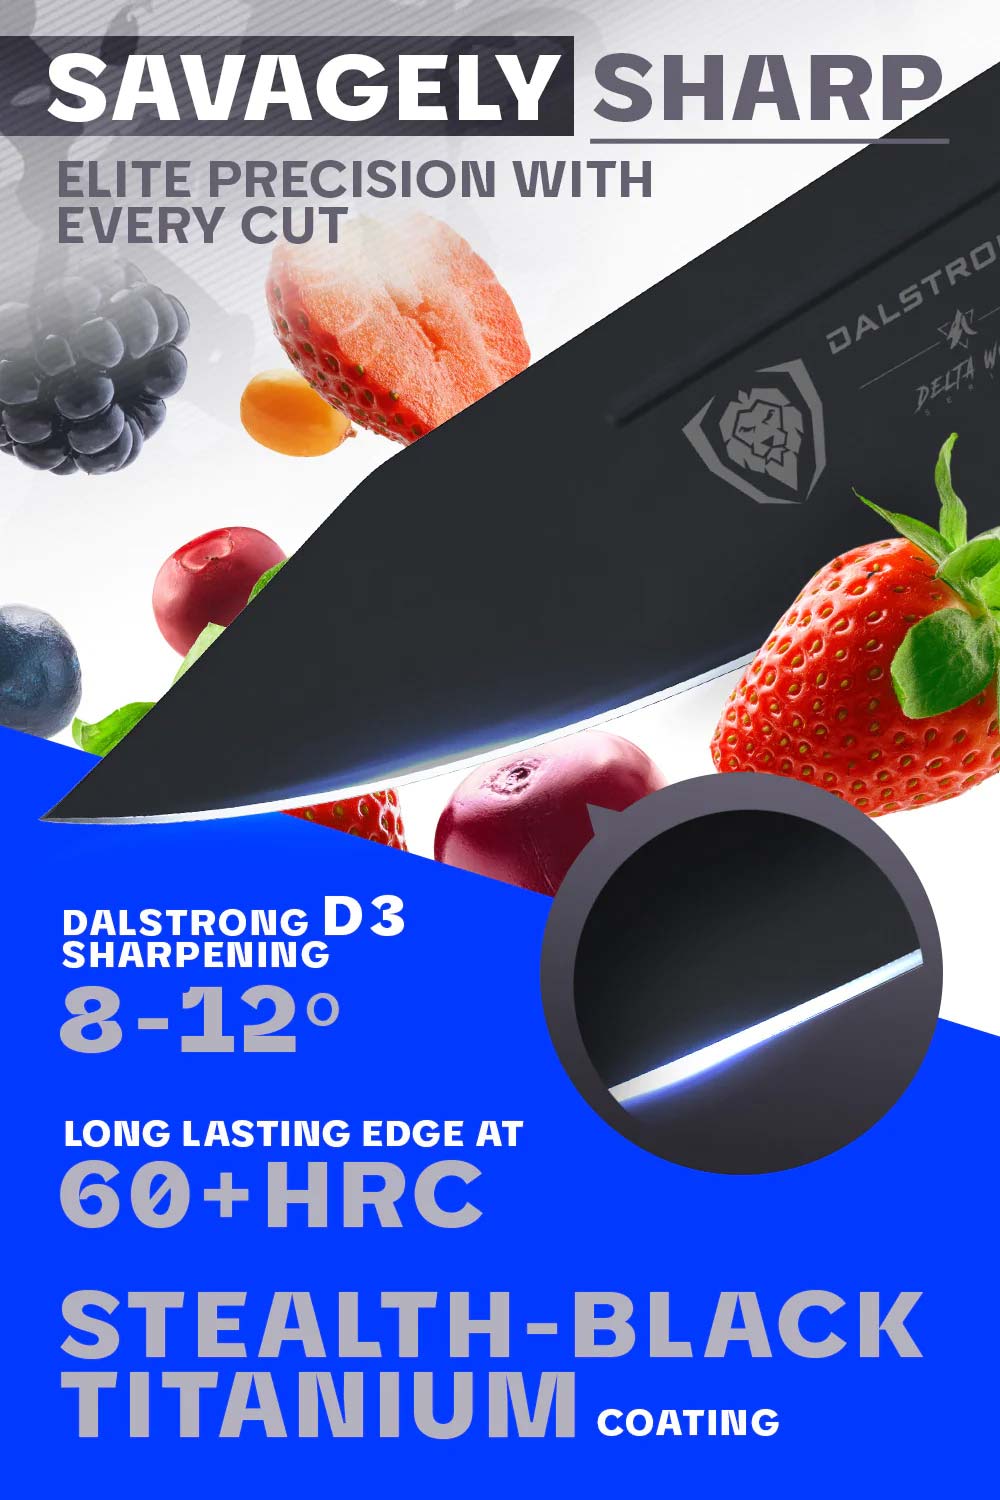 Dalstrong delta wolf series 4 inch paring knife featuring it's razor sharp black blade.